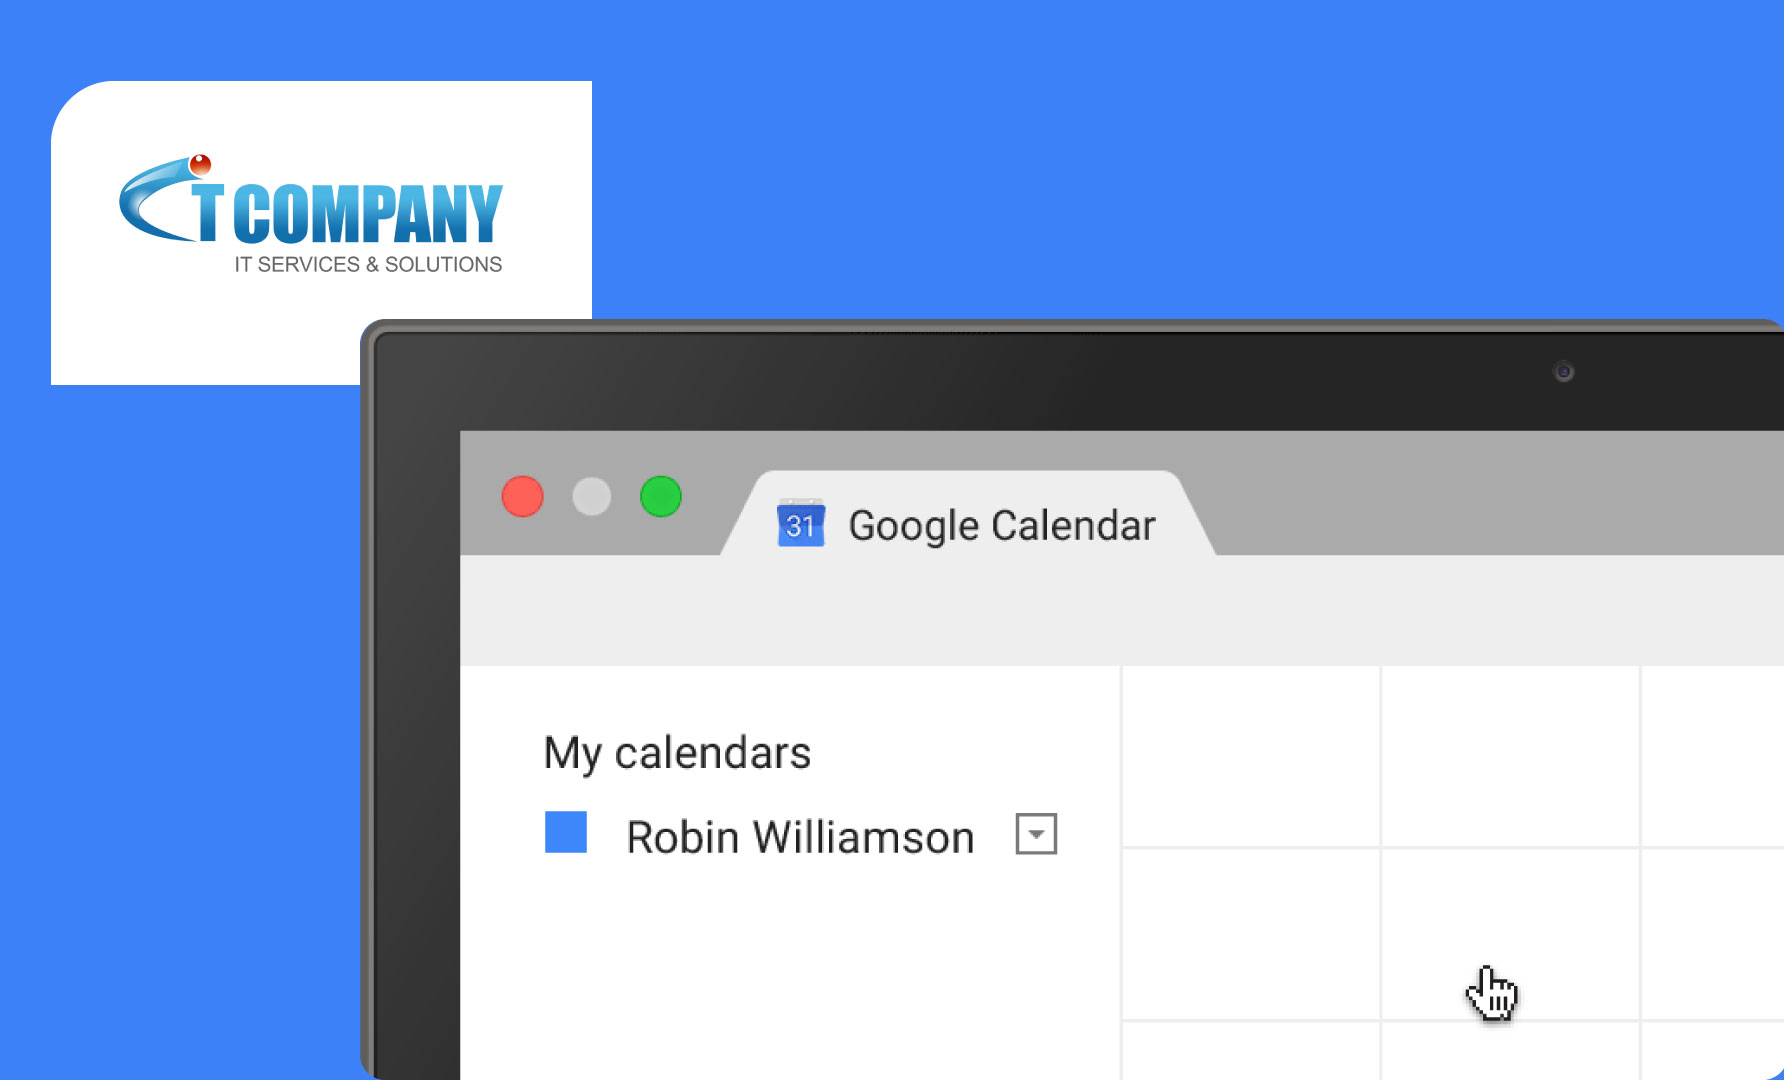 Meetings may be shown on your Google Calendar to illustrate how much of your time is taken up by them